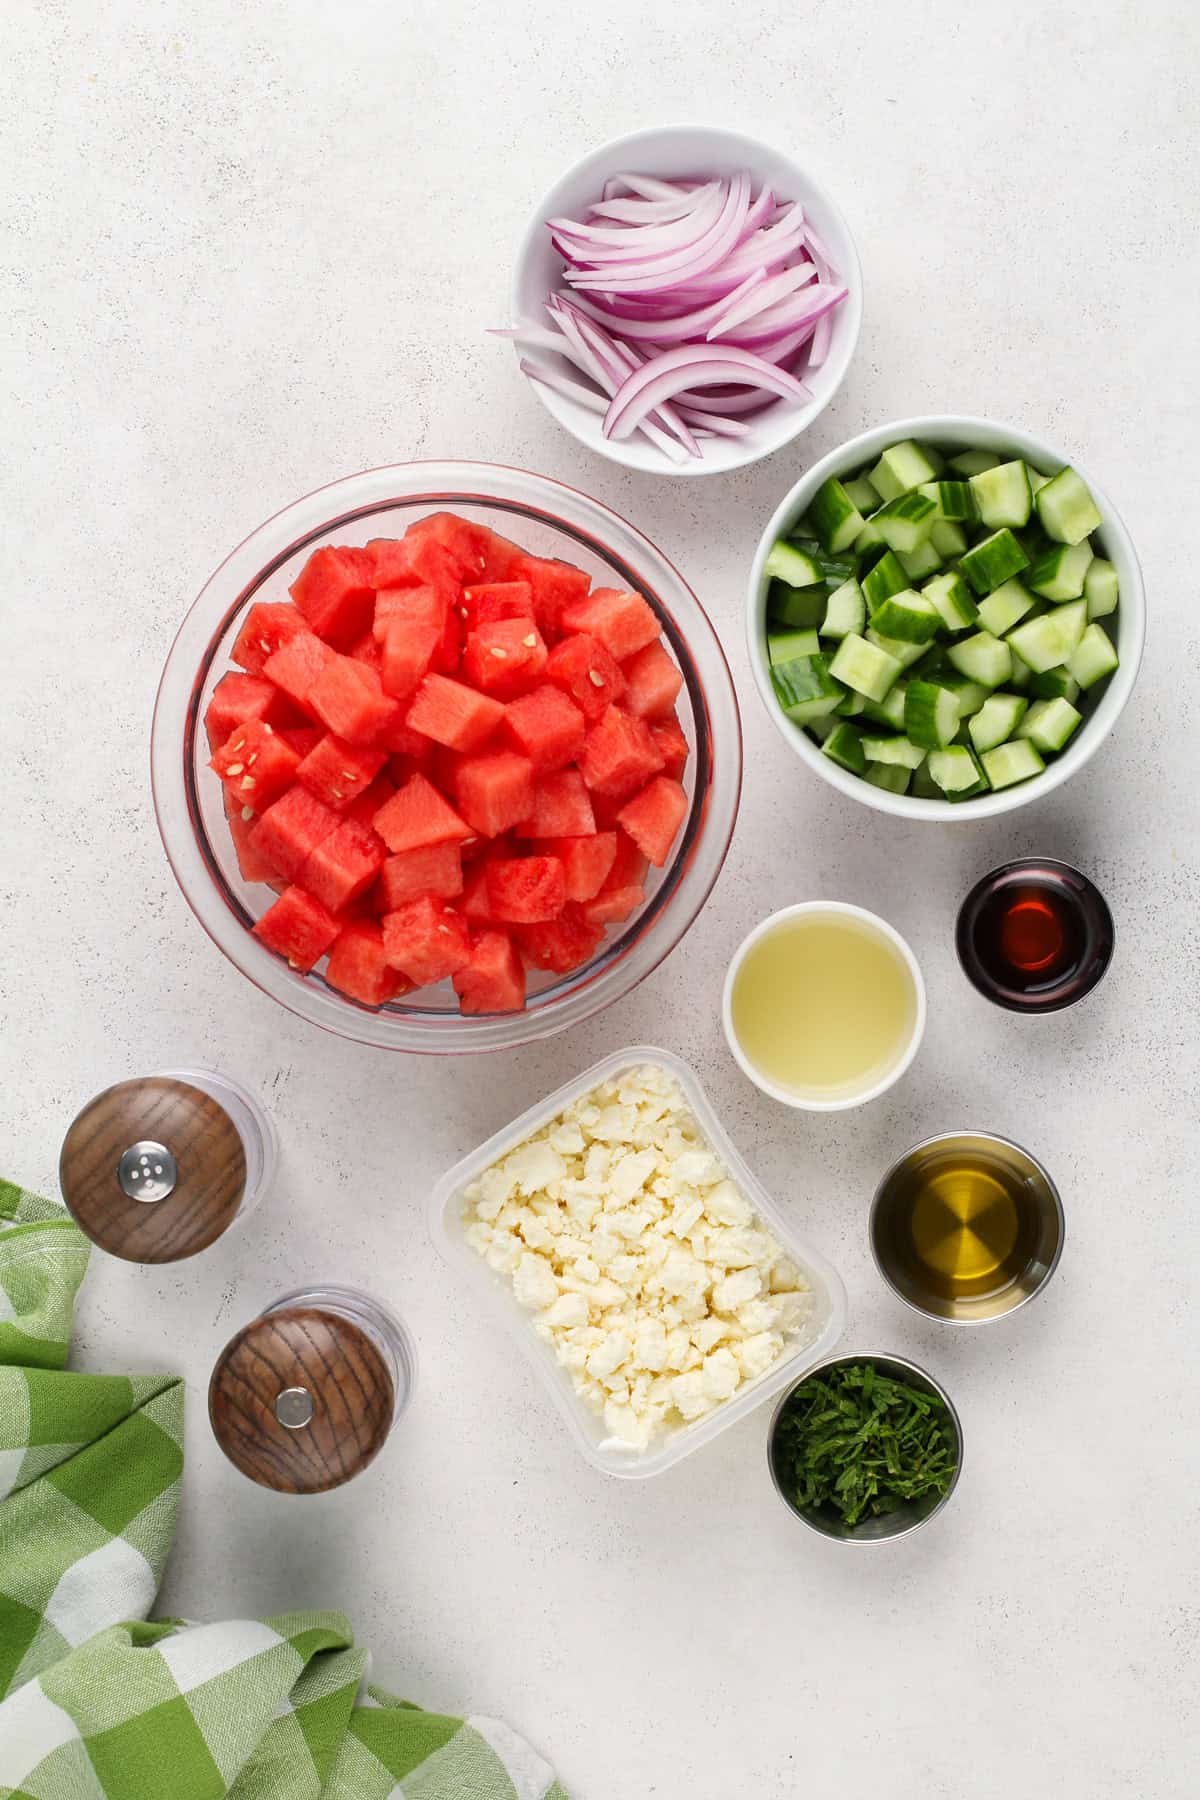 Ingredients for watermelon feta salad arranged on a countertop.